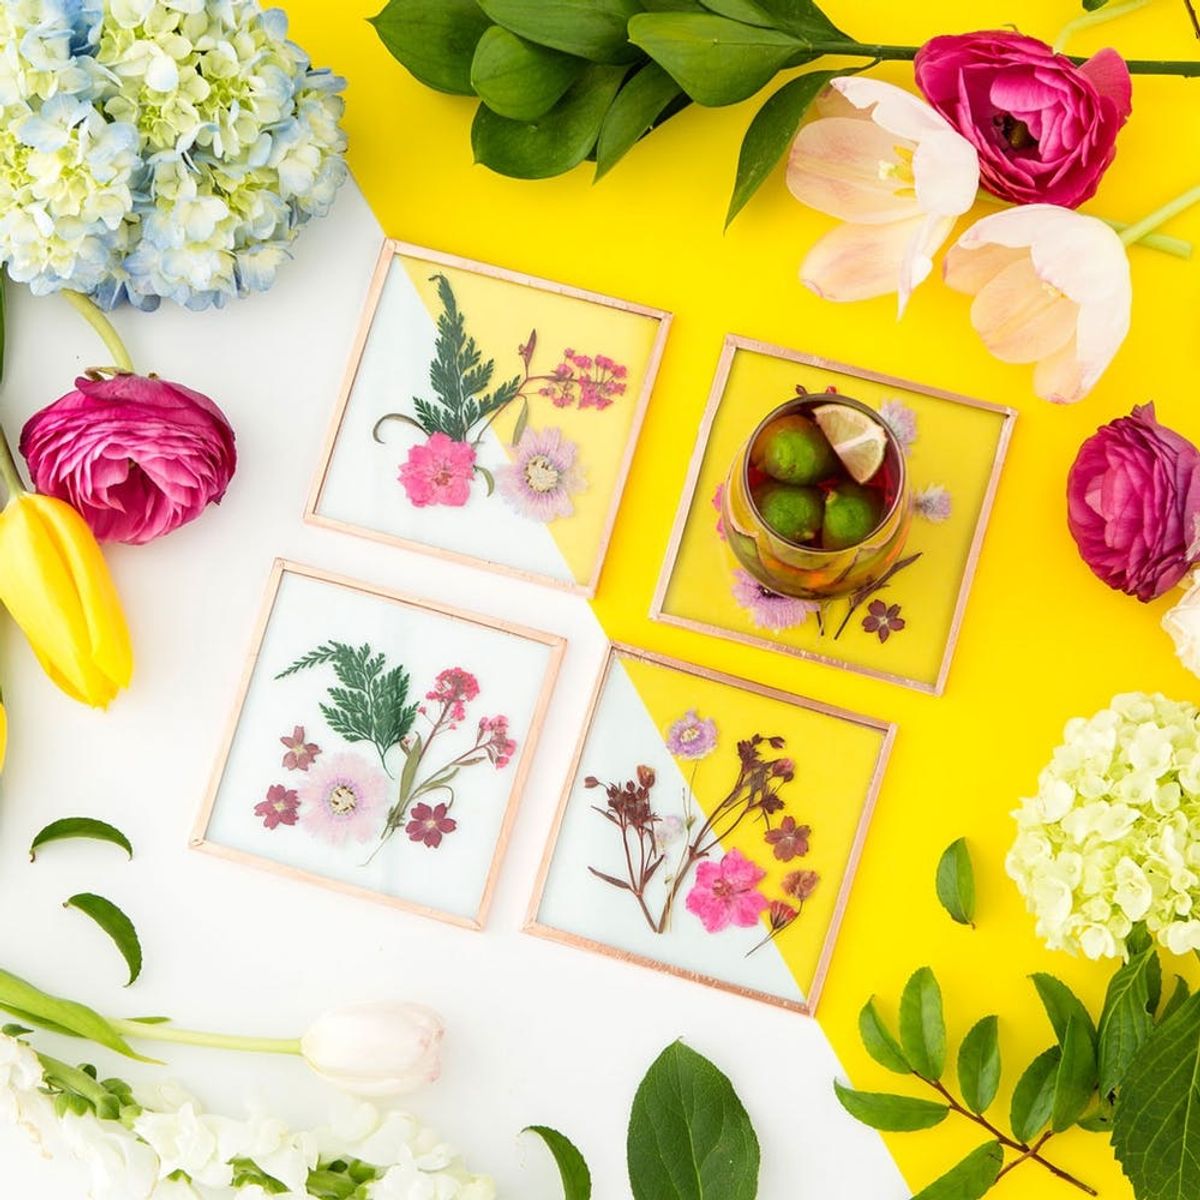 How to Make Pretty Pressed Flower Coasters